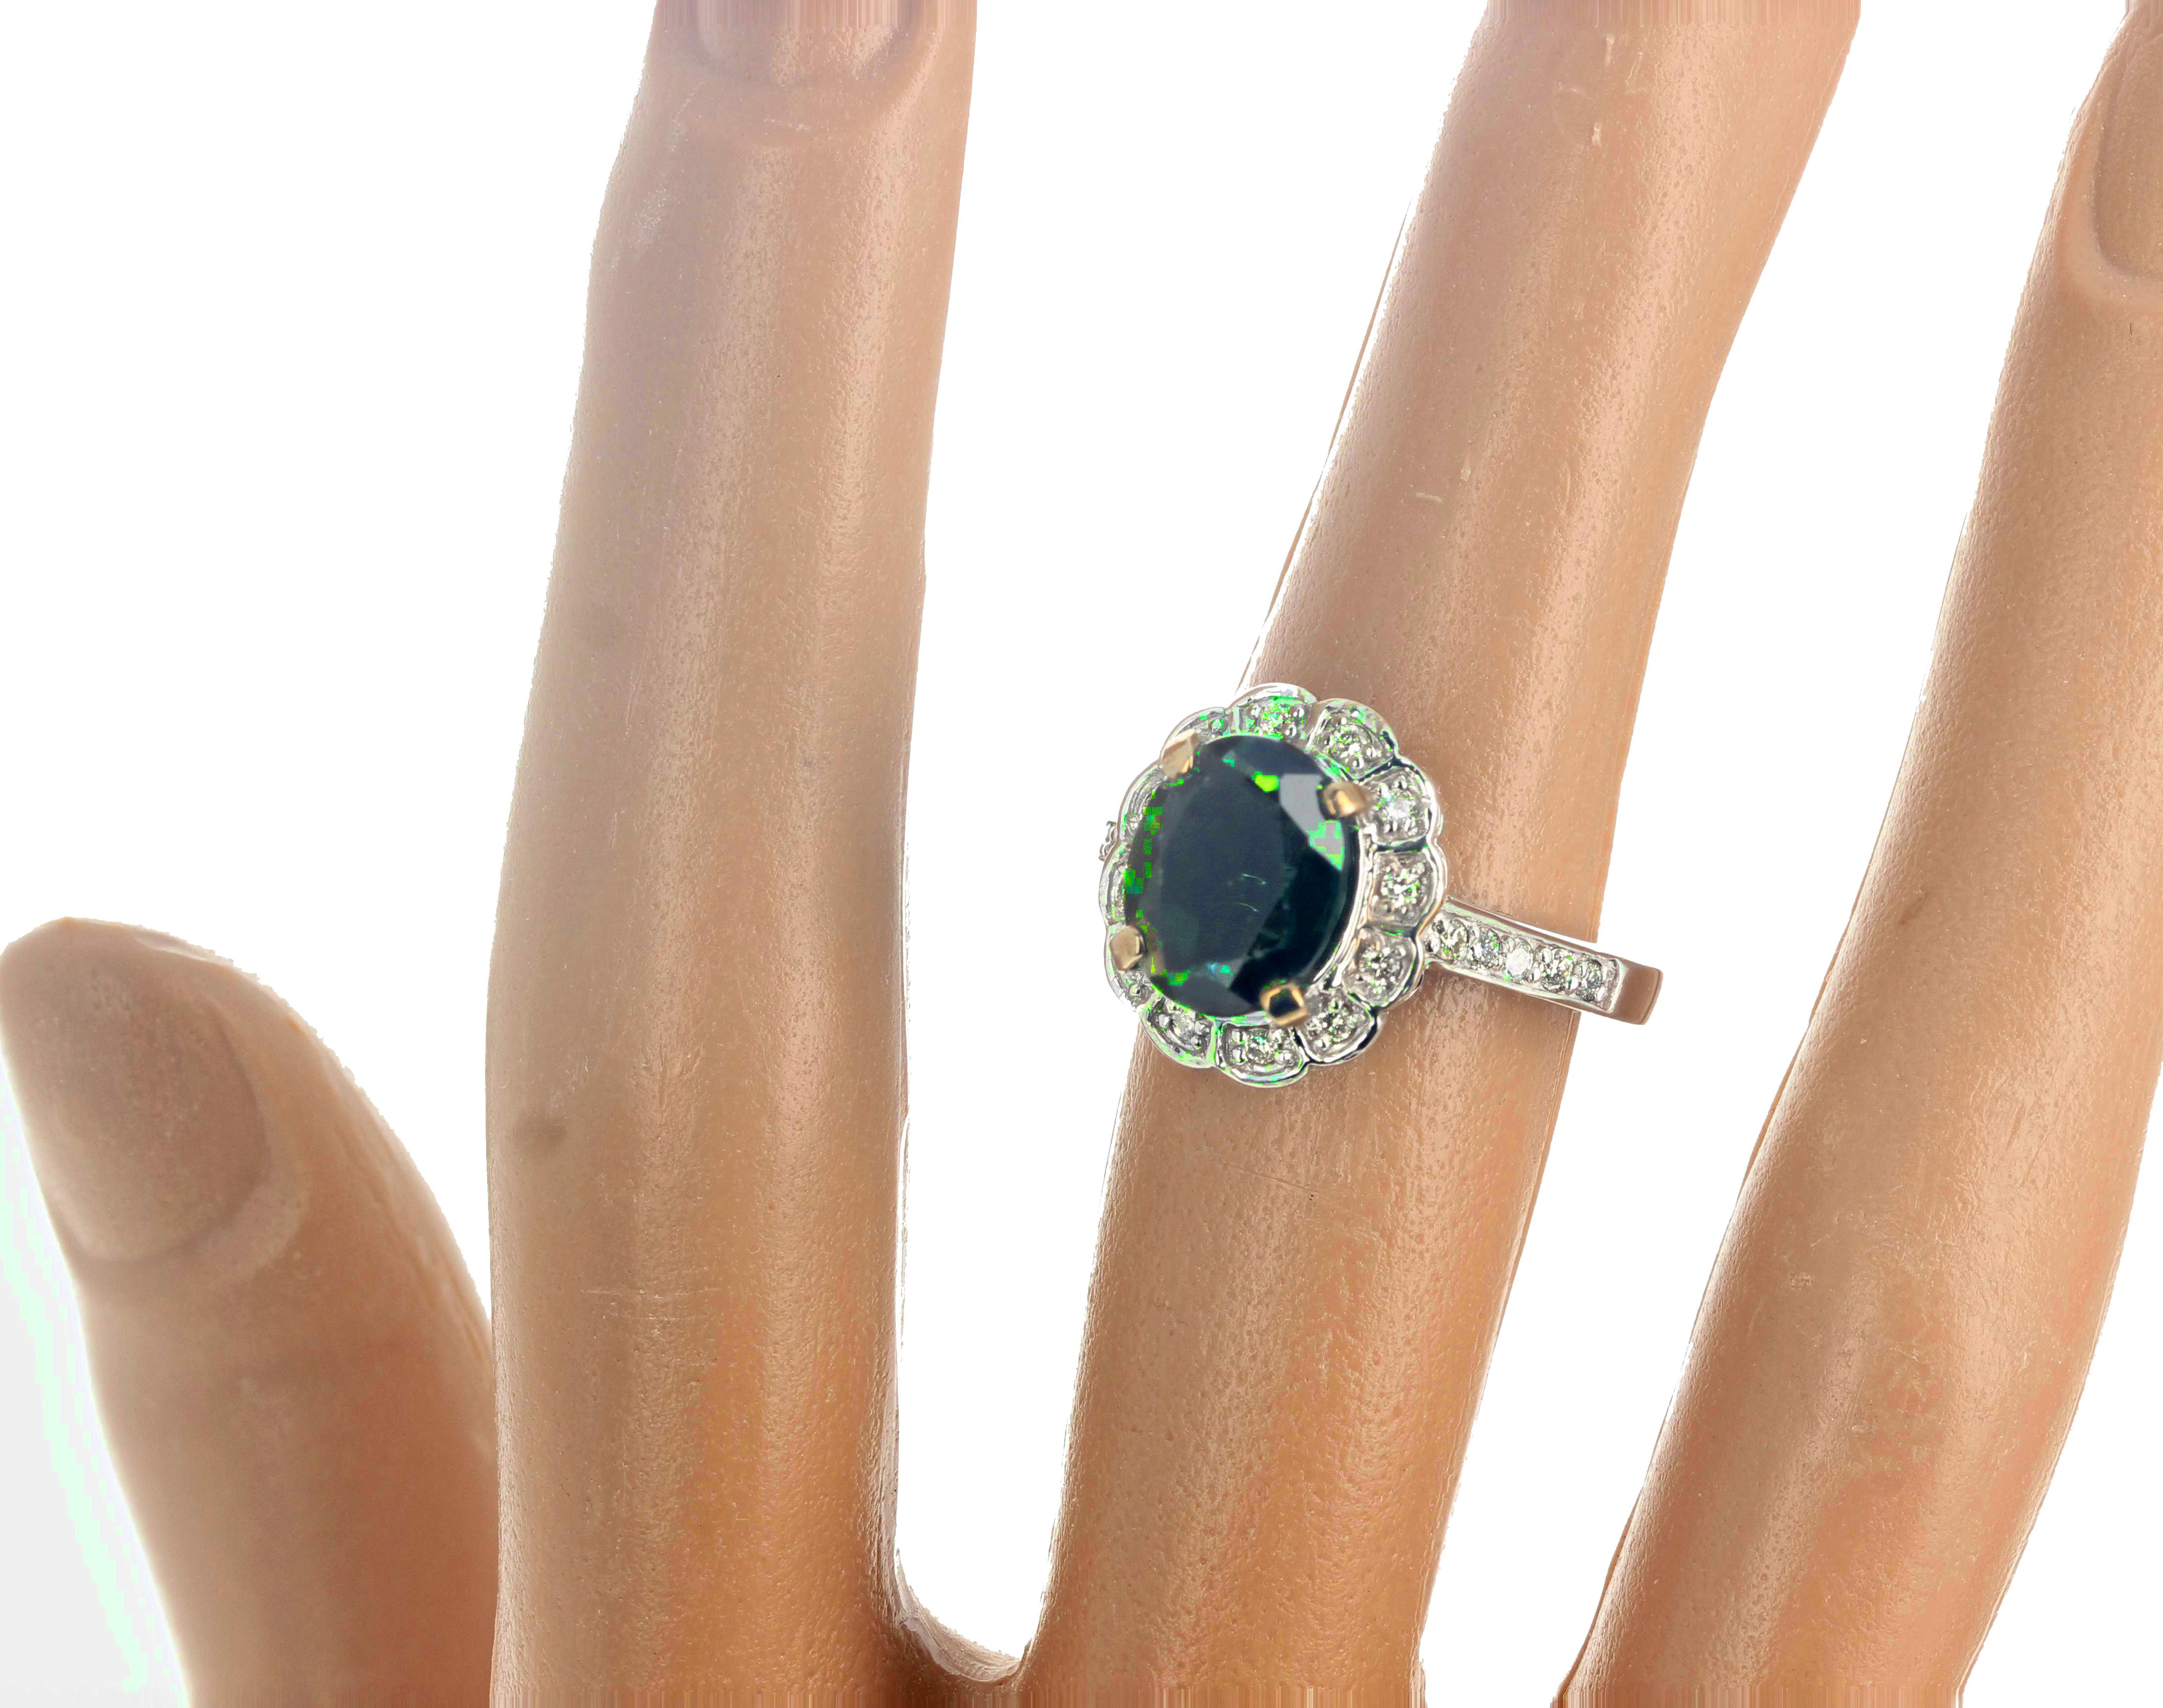 AJD Intensely Glowing 2.23 Ct Green Apatite & White Diamonds Ring For Sale 1